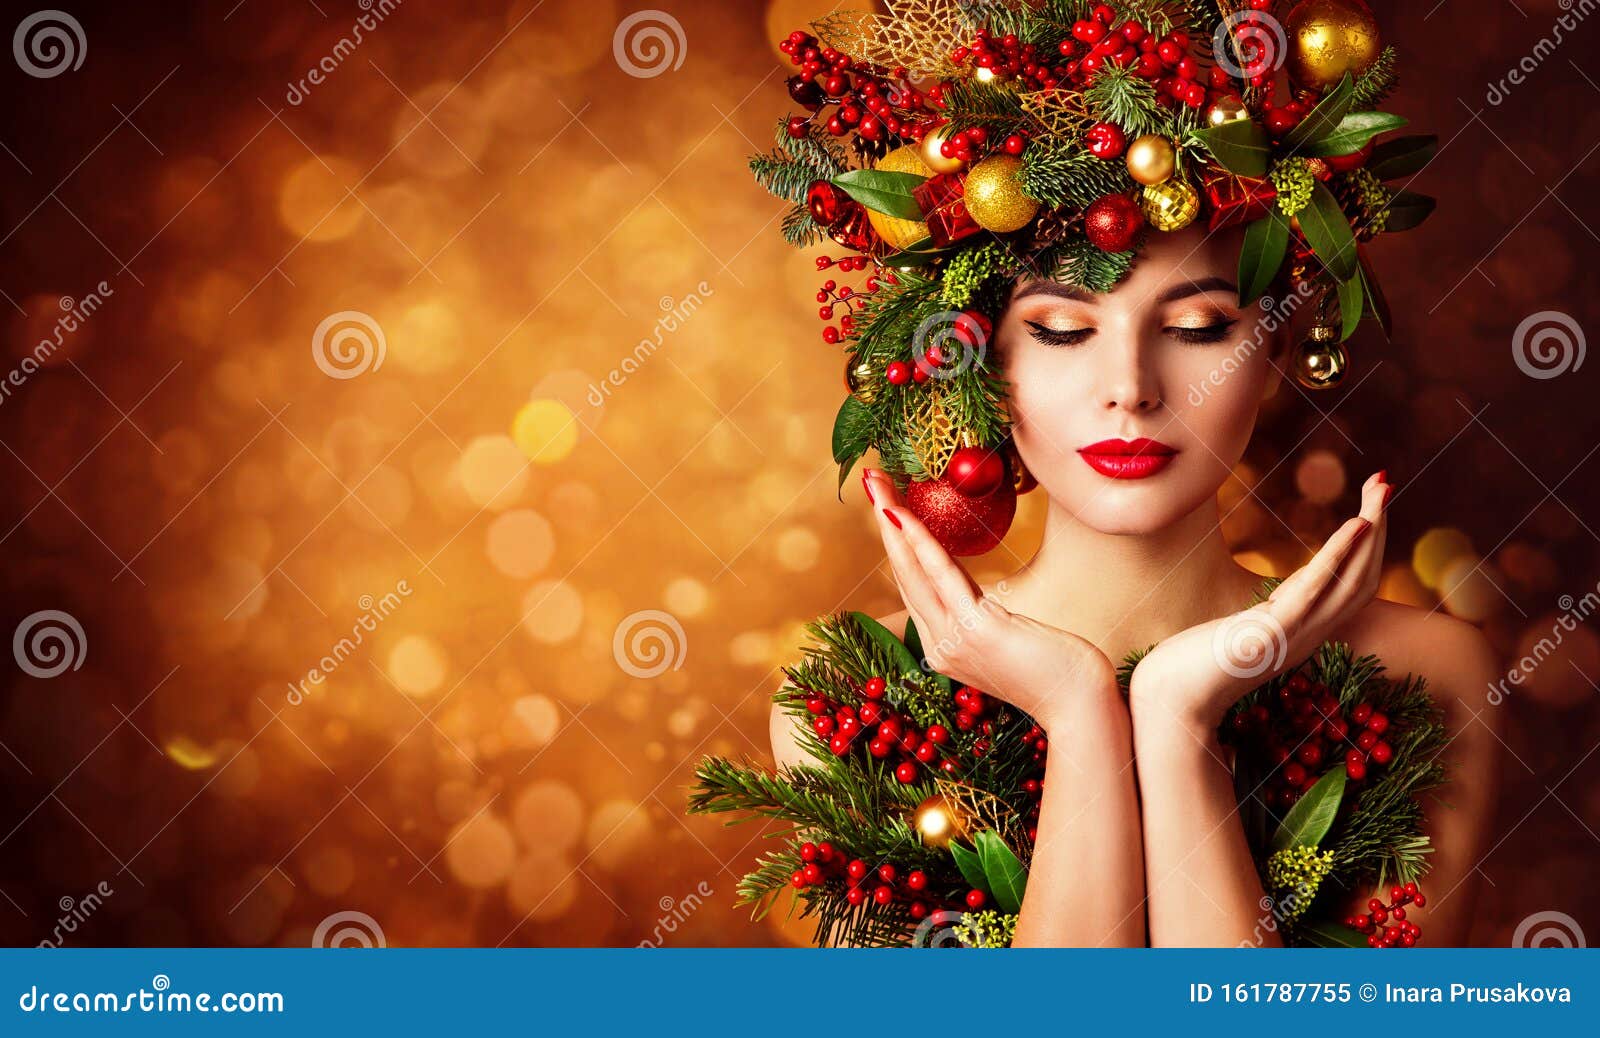 christmas face and hands skin care, woman beauty makeup, art wreath hairstyle, xmas beautiful portrait